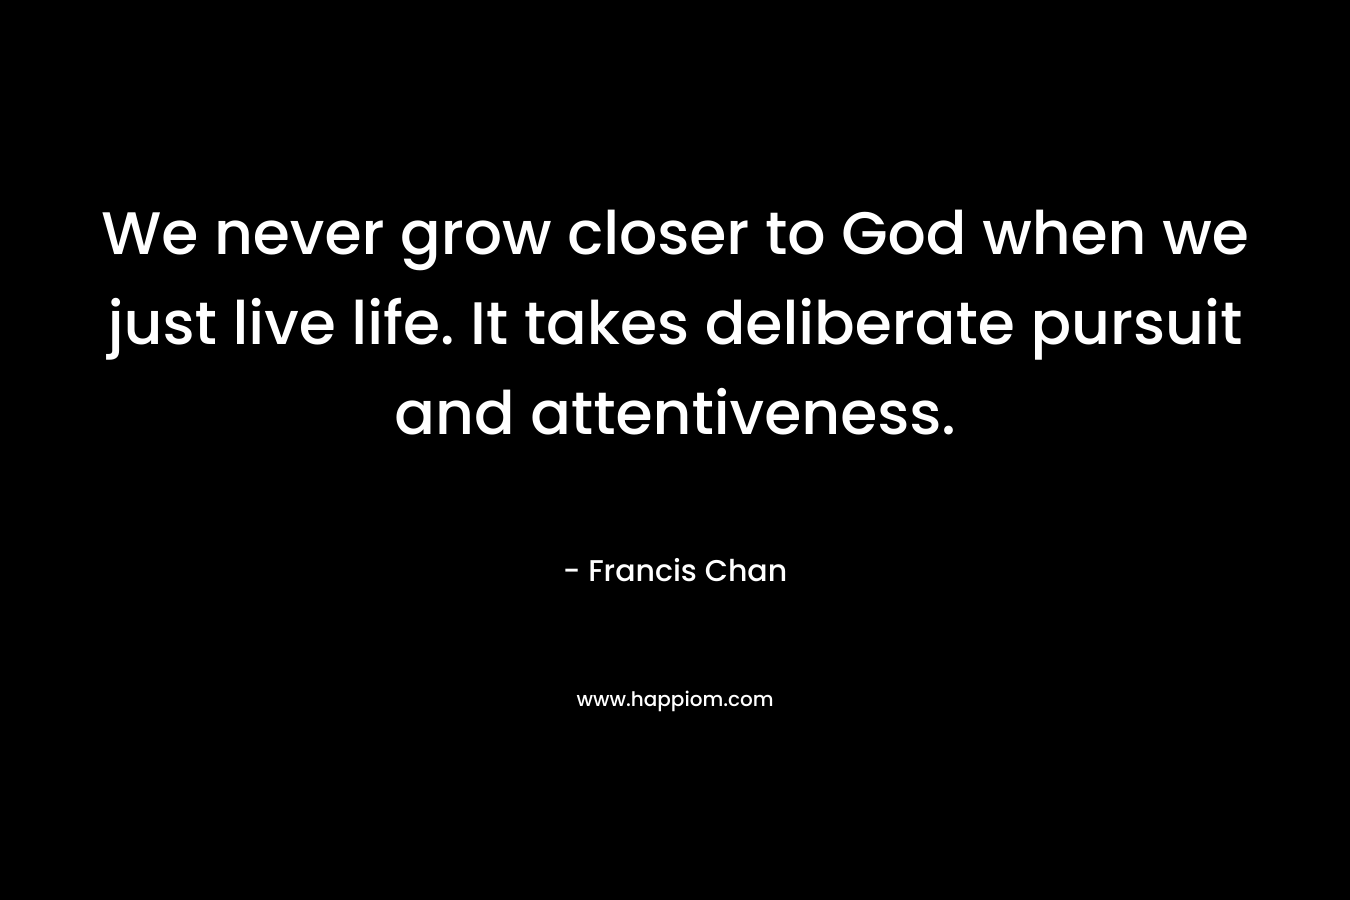 We never grow closer to God when we just live life. It takes deliberate pursuit and attentiveness.